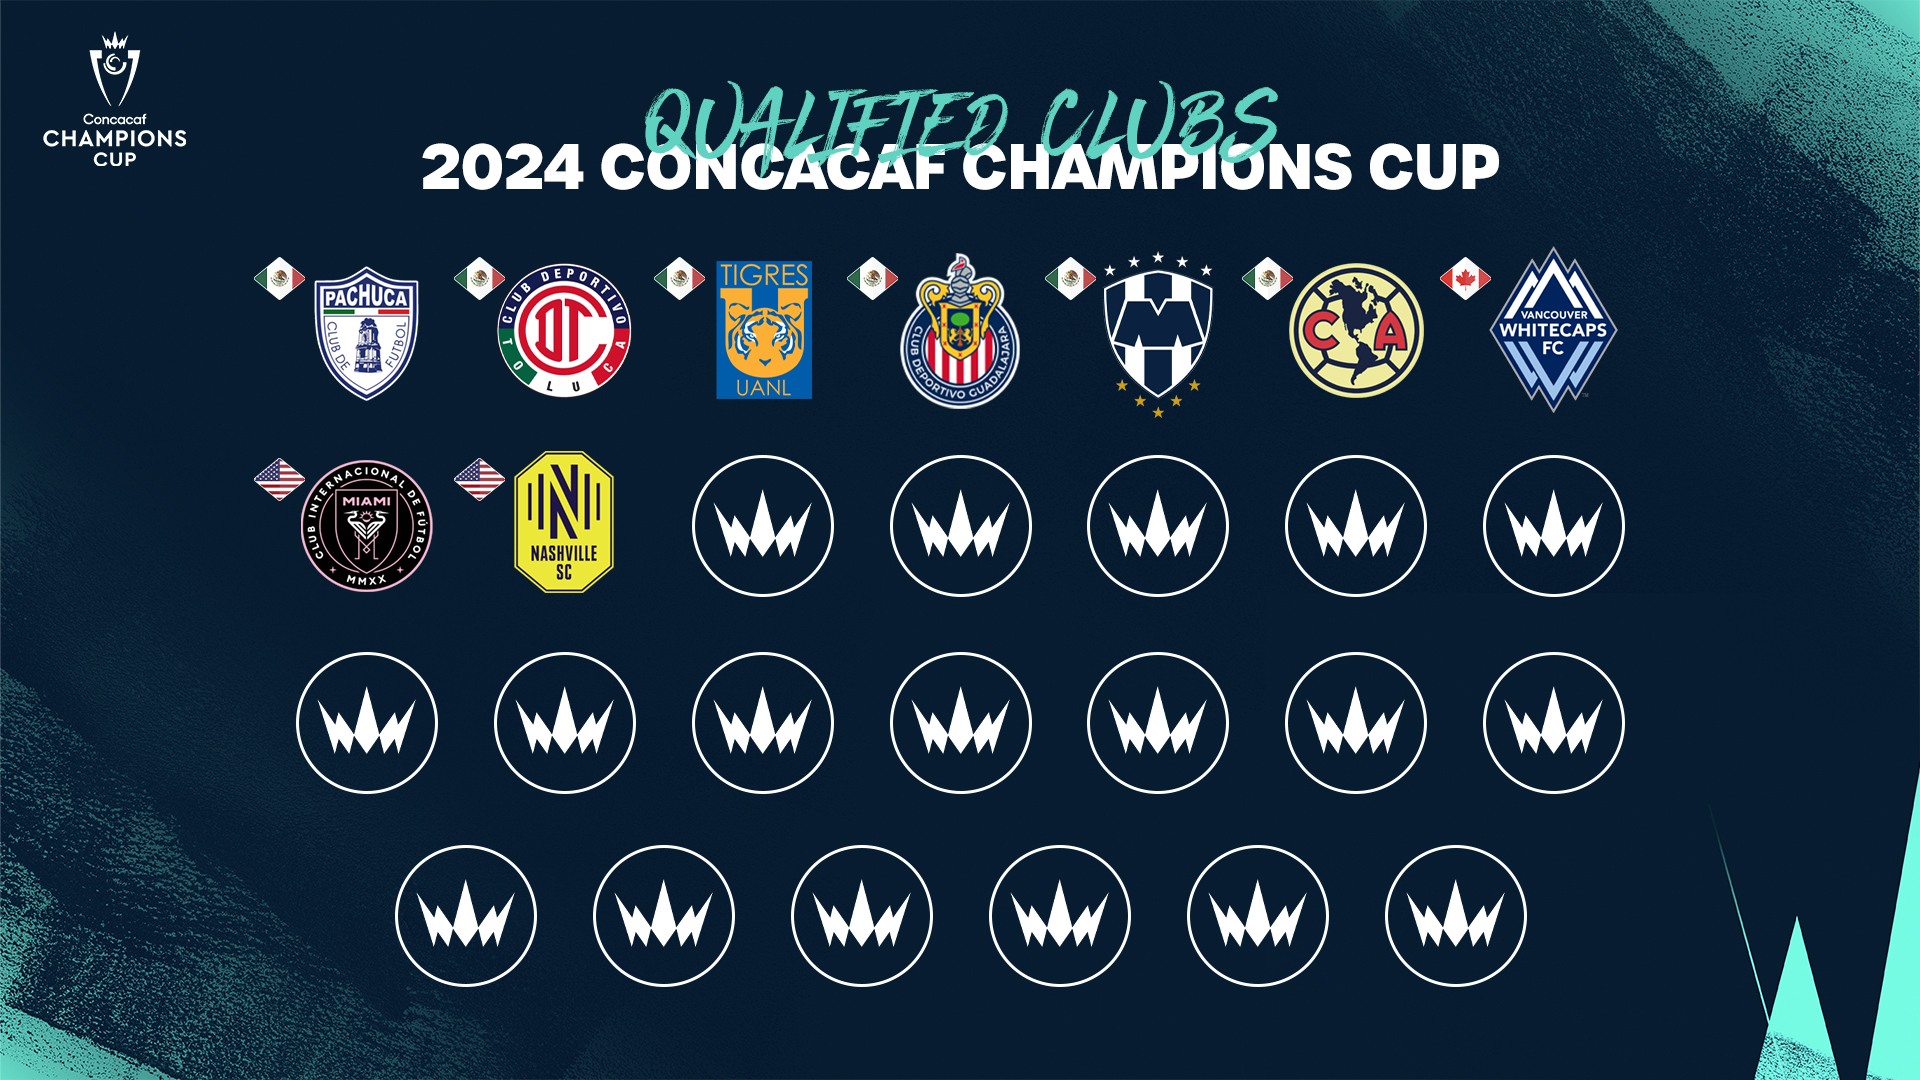 A Look at 2024 CONCACAF Champions Cup Qualification as of 8/16/23 r/MLS